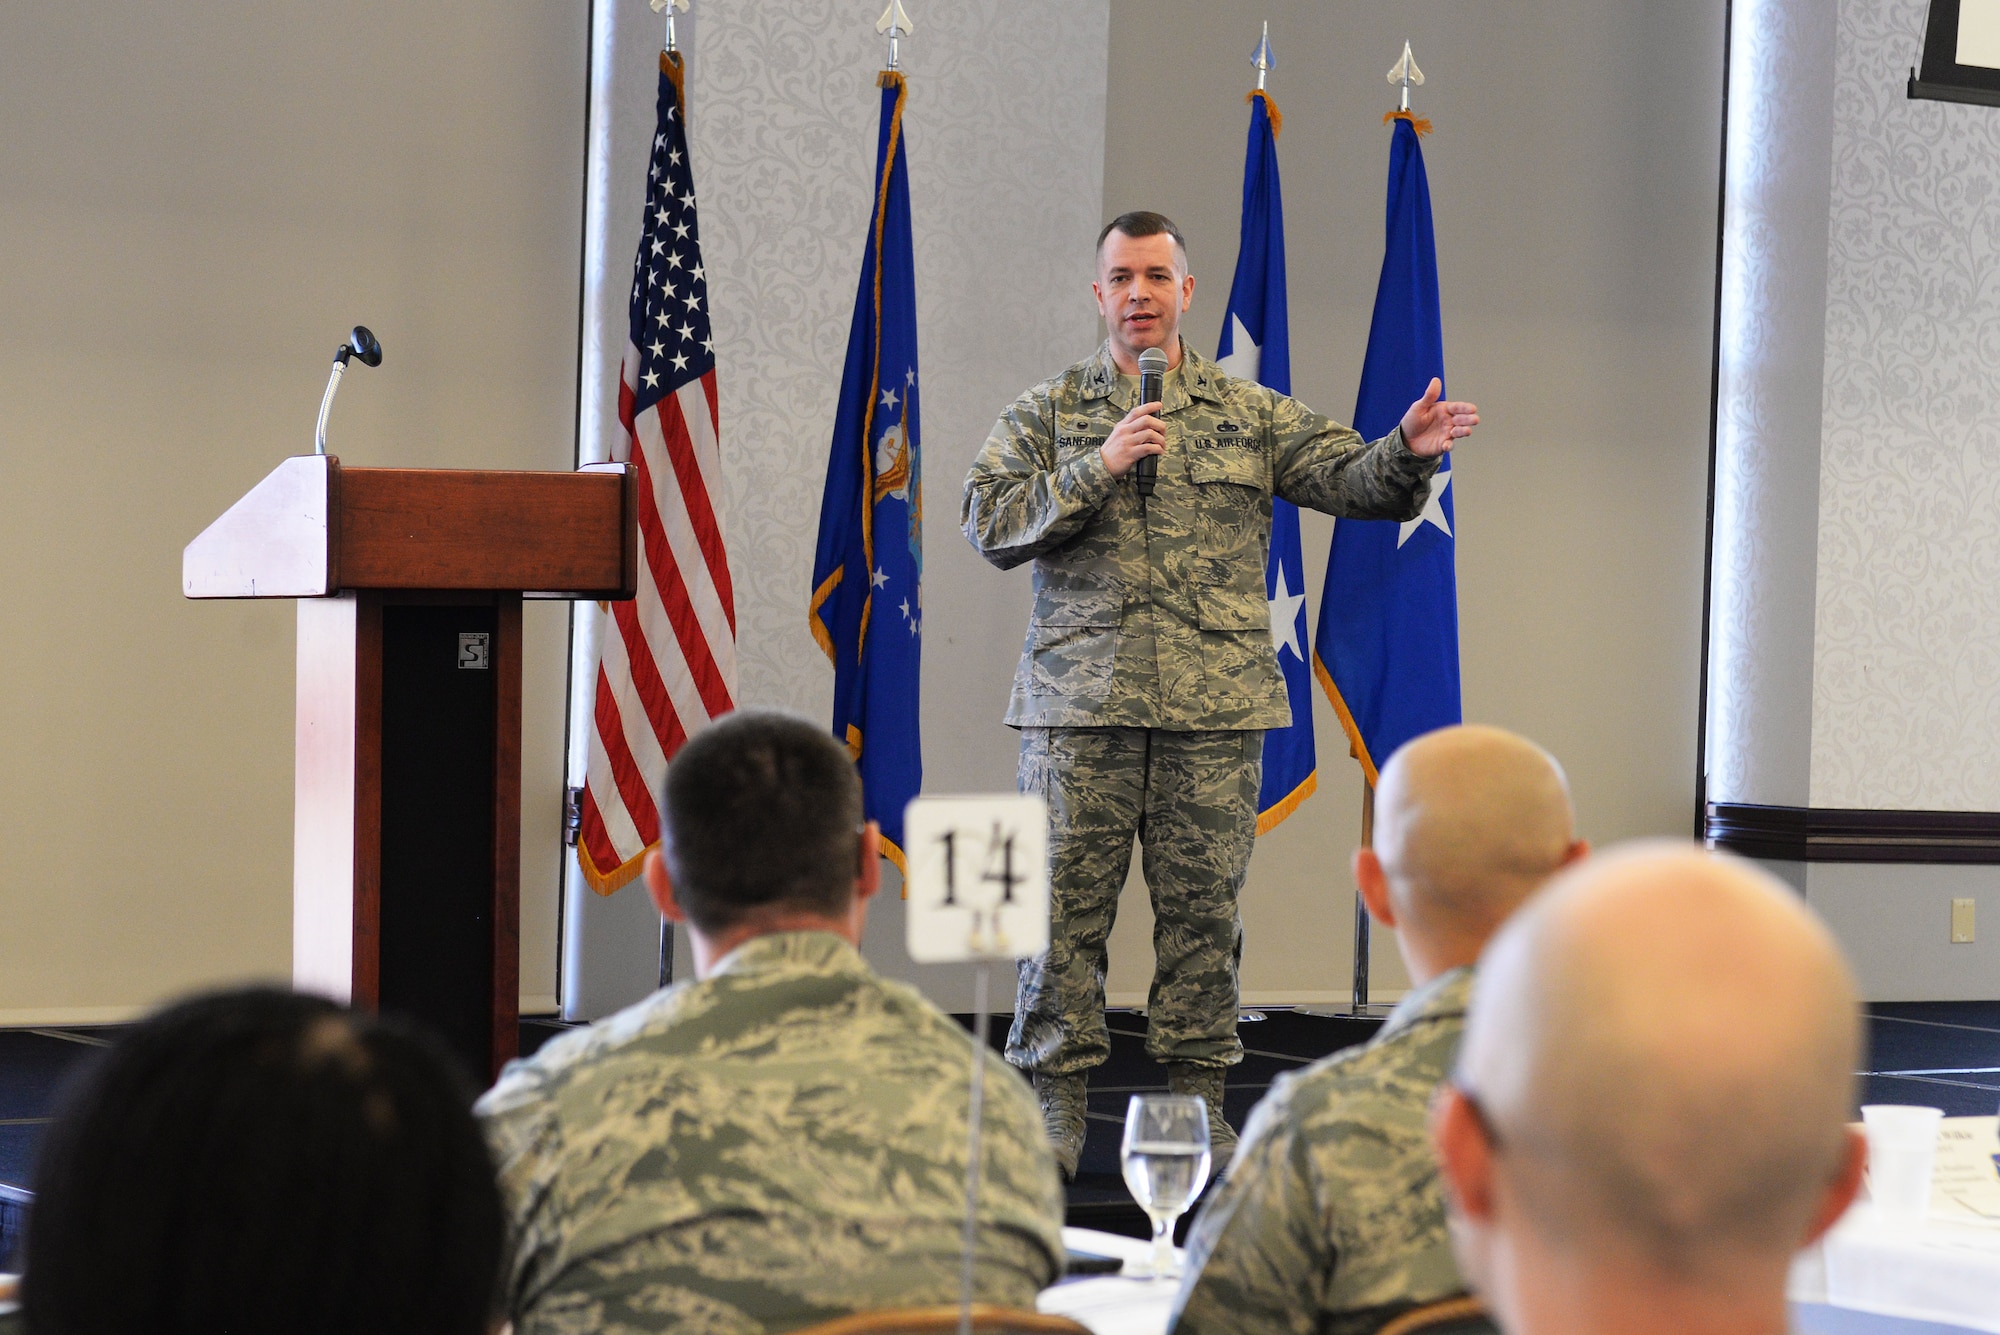 Col. David Sanford, 635th Supply Chain Operations Wing commander, talks about the SCOW organizational chart March 21 at the Scott Event Center.  He showed how to better utilize the logistics readiness agencies to be successful in executing their missions. The 635th SCOW hosted a 2-day logistics summit, which brought together logistics readiness leaders from different commands so they could learn from each other about how to better their procedures and processes.  (U.S. Air Force photo by Tech. Sgt. Maria Castle)